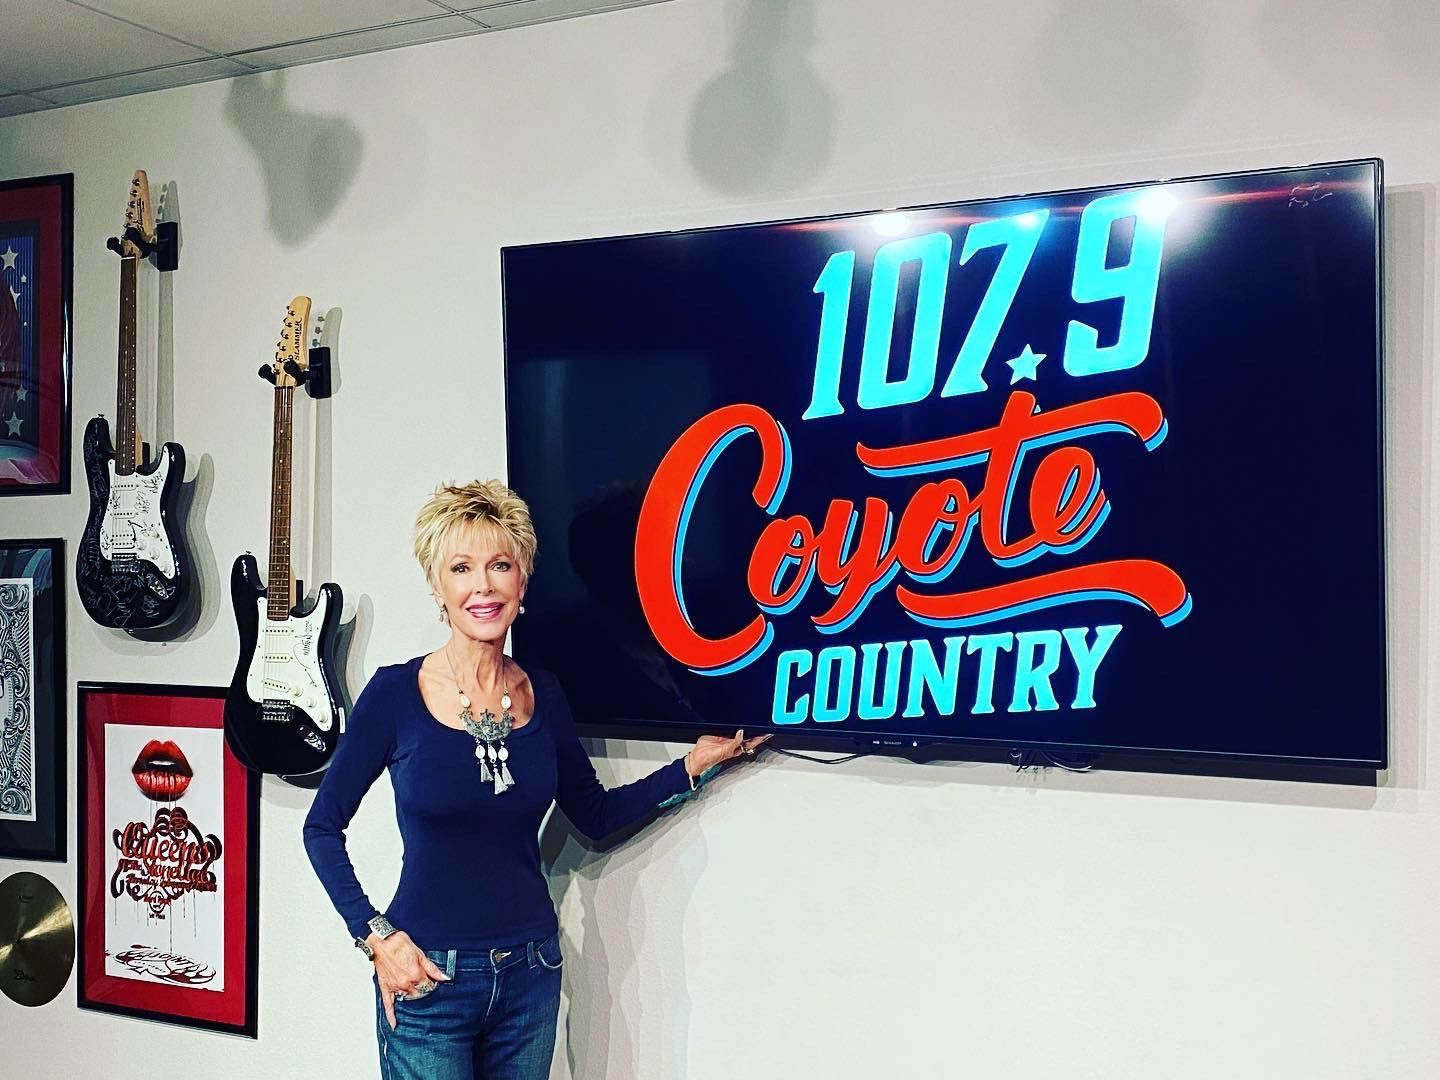 a woman is standing in front of a sign that says 107.9 coyote country